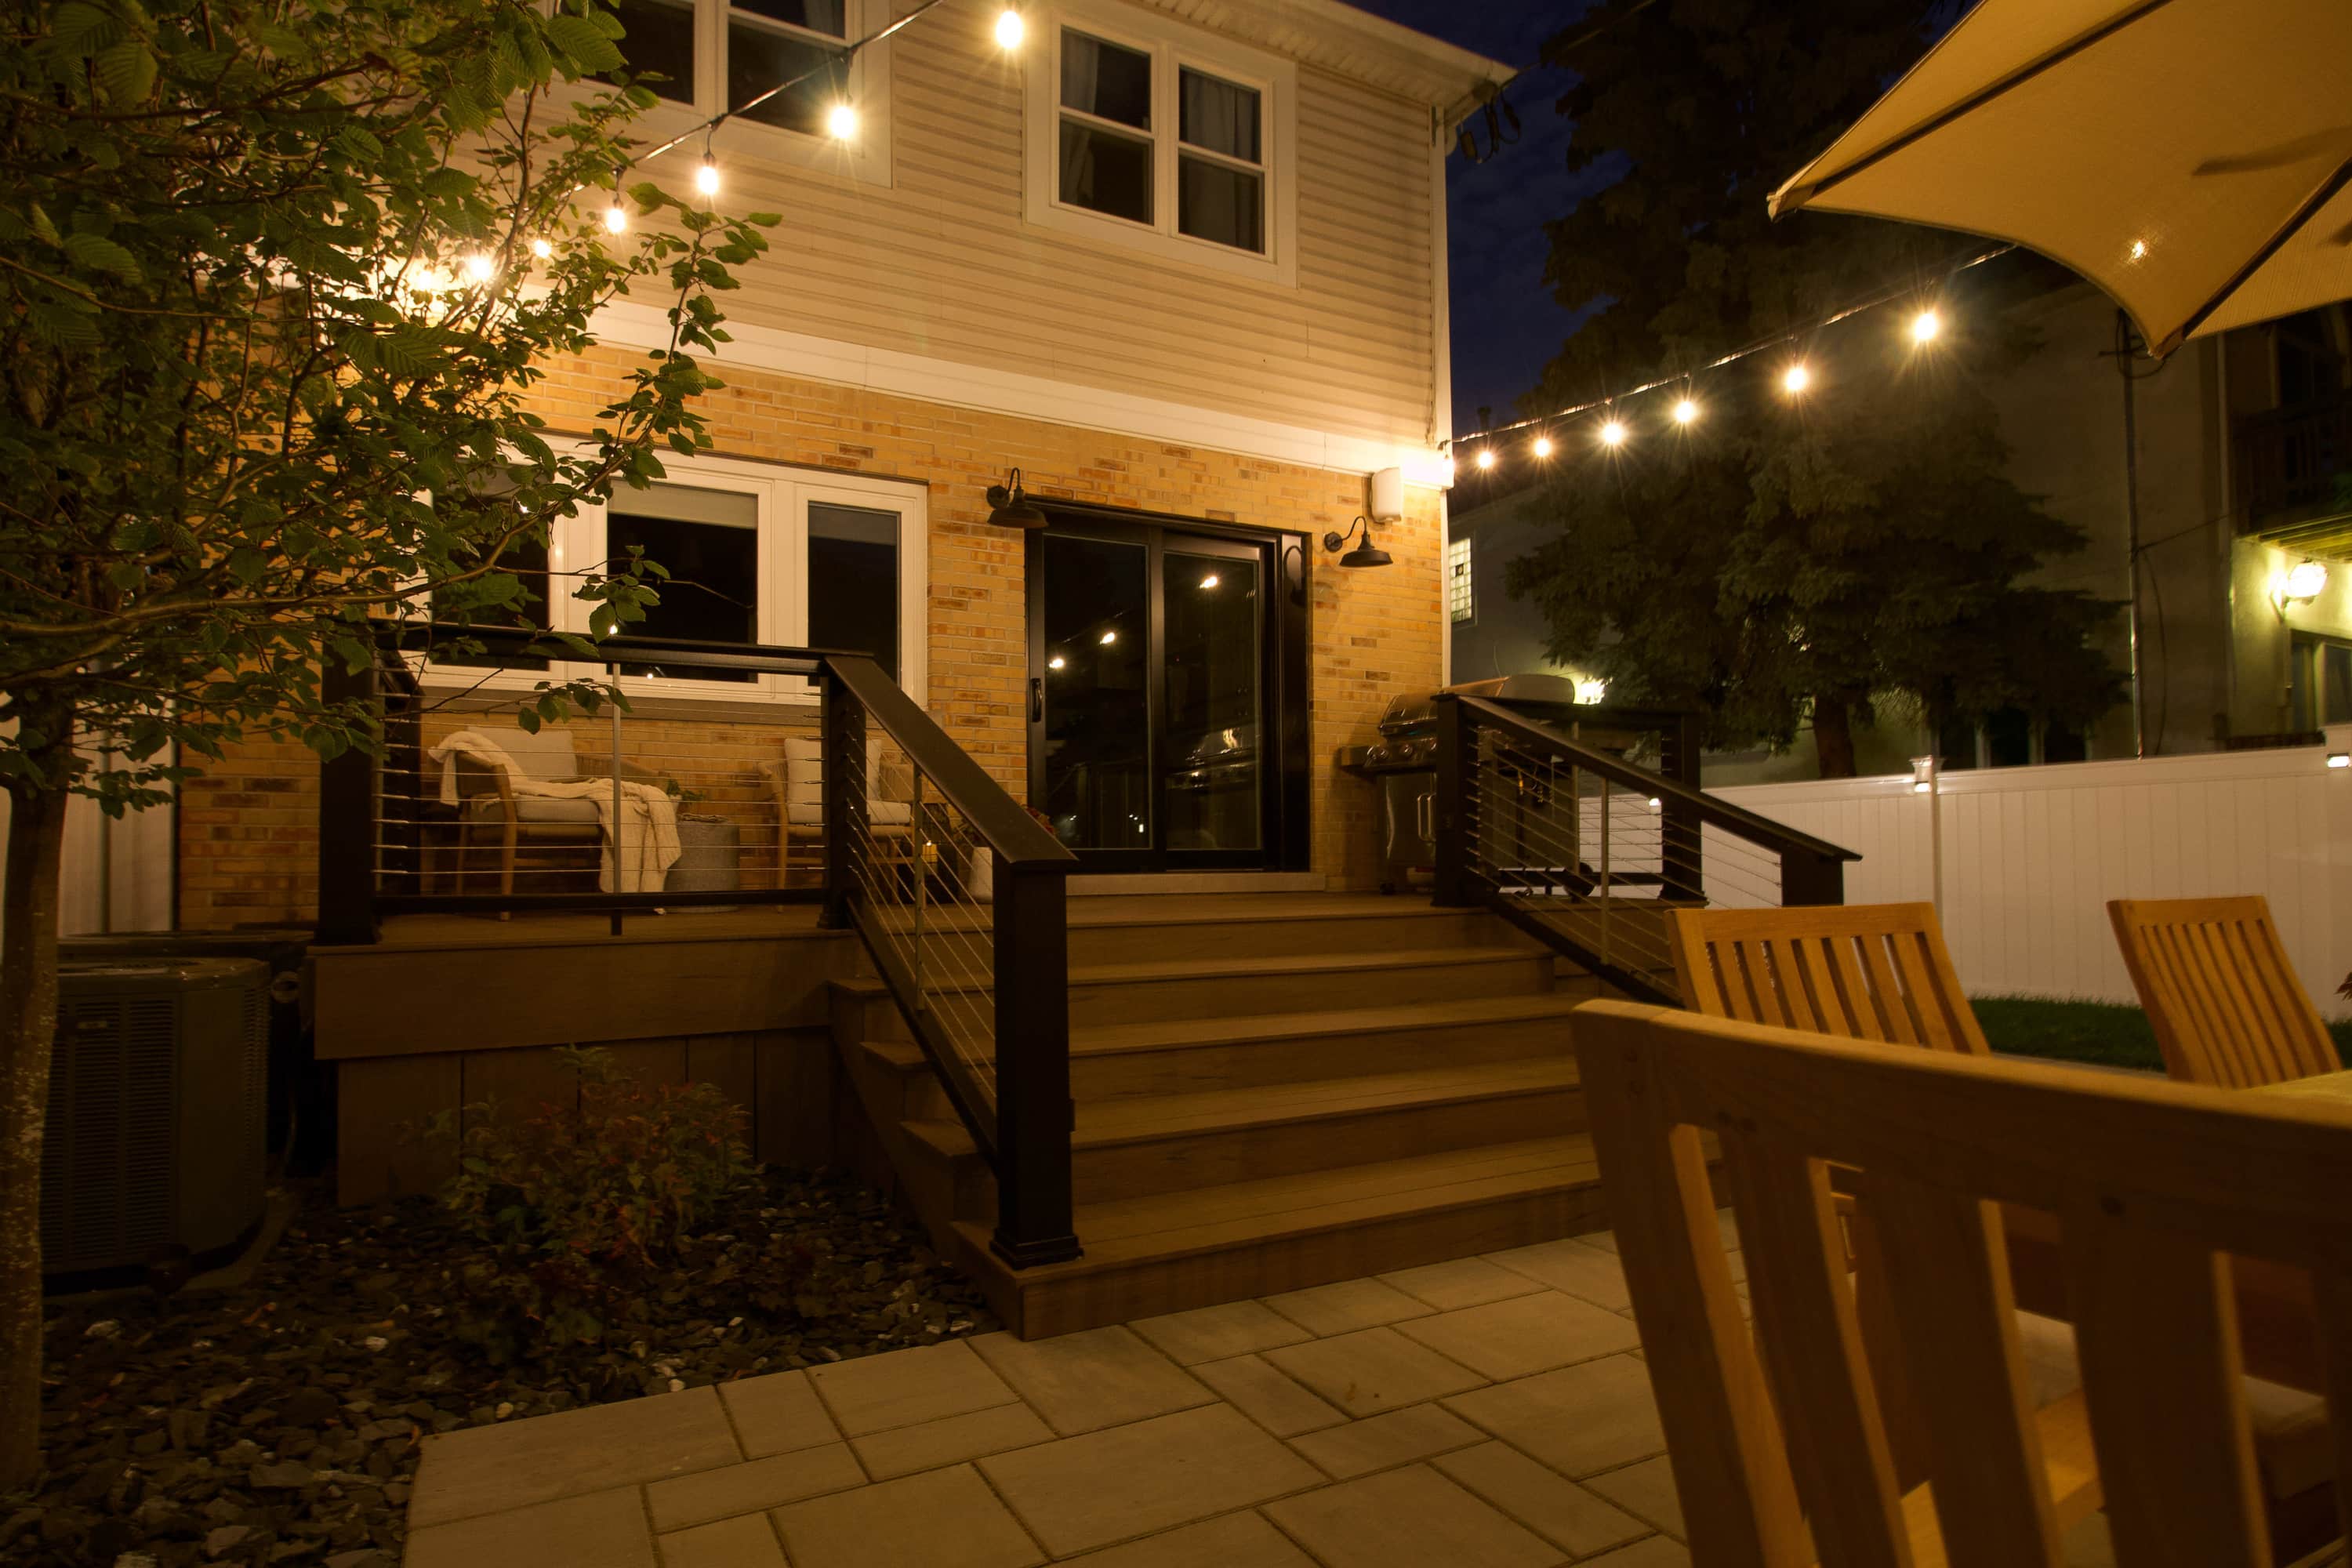 Our cozy patio at night